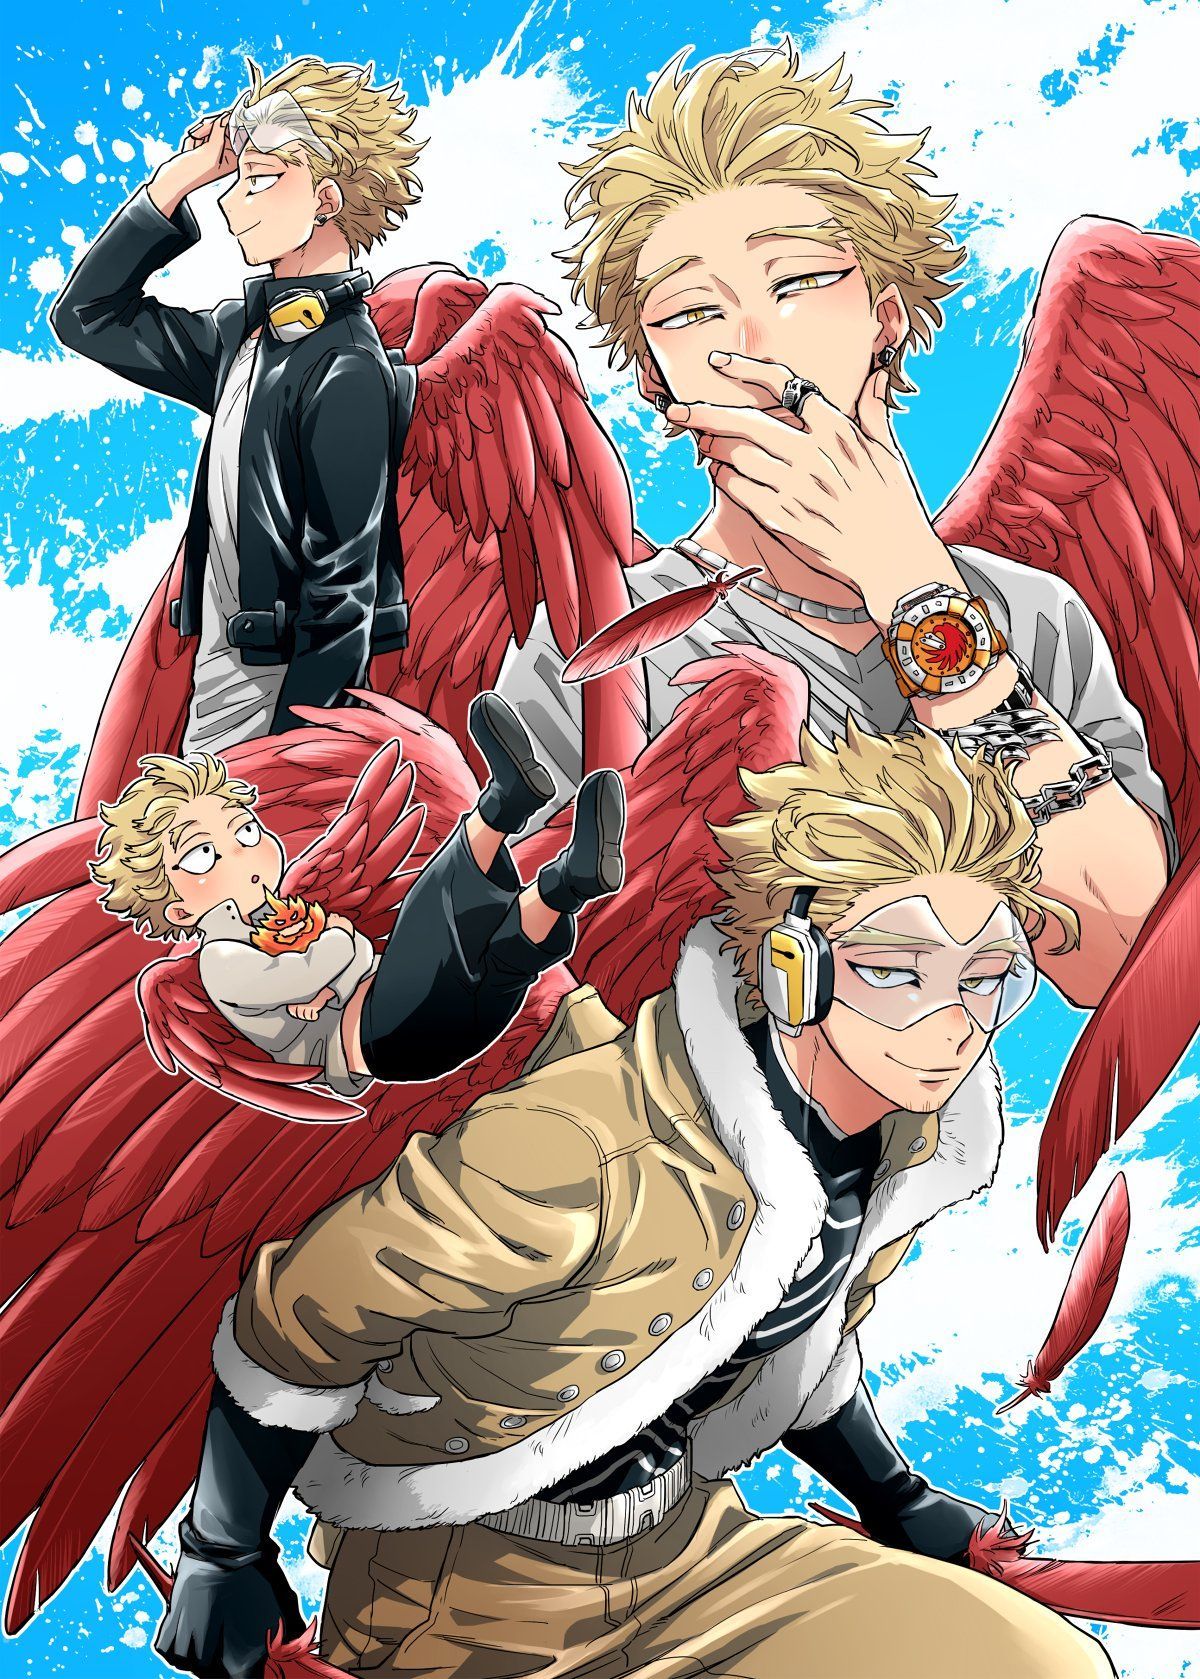 Bnha Hawks Fanart posted by Michelle Sellers